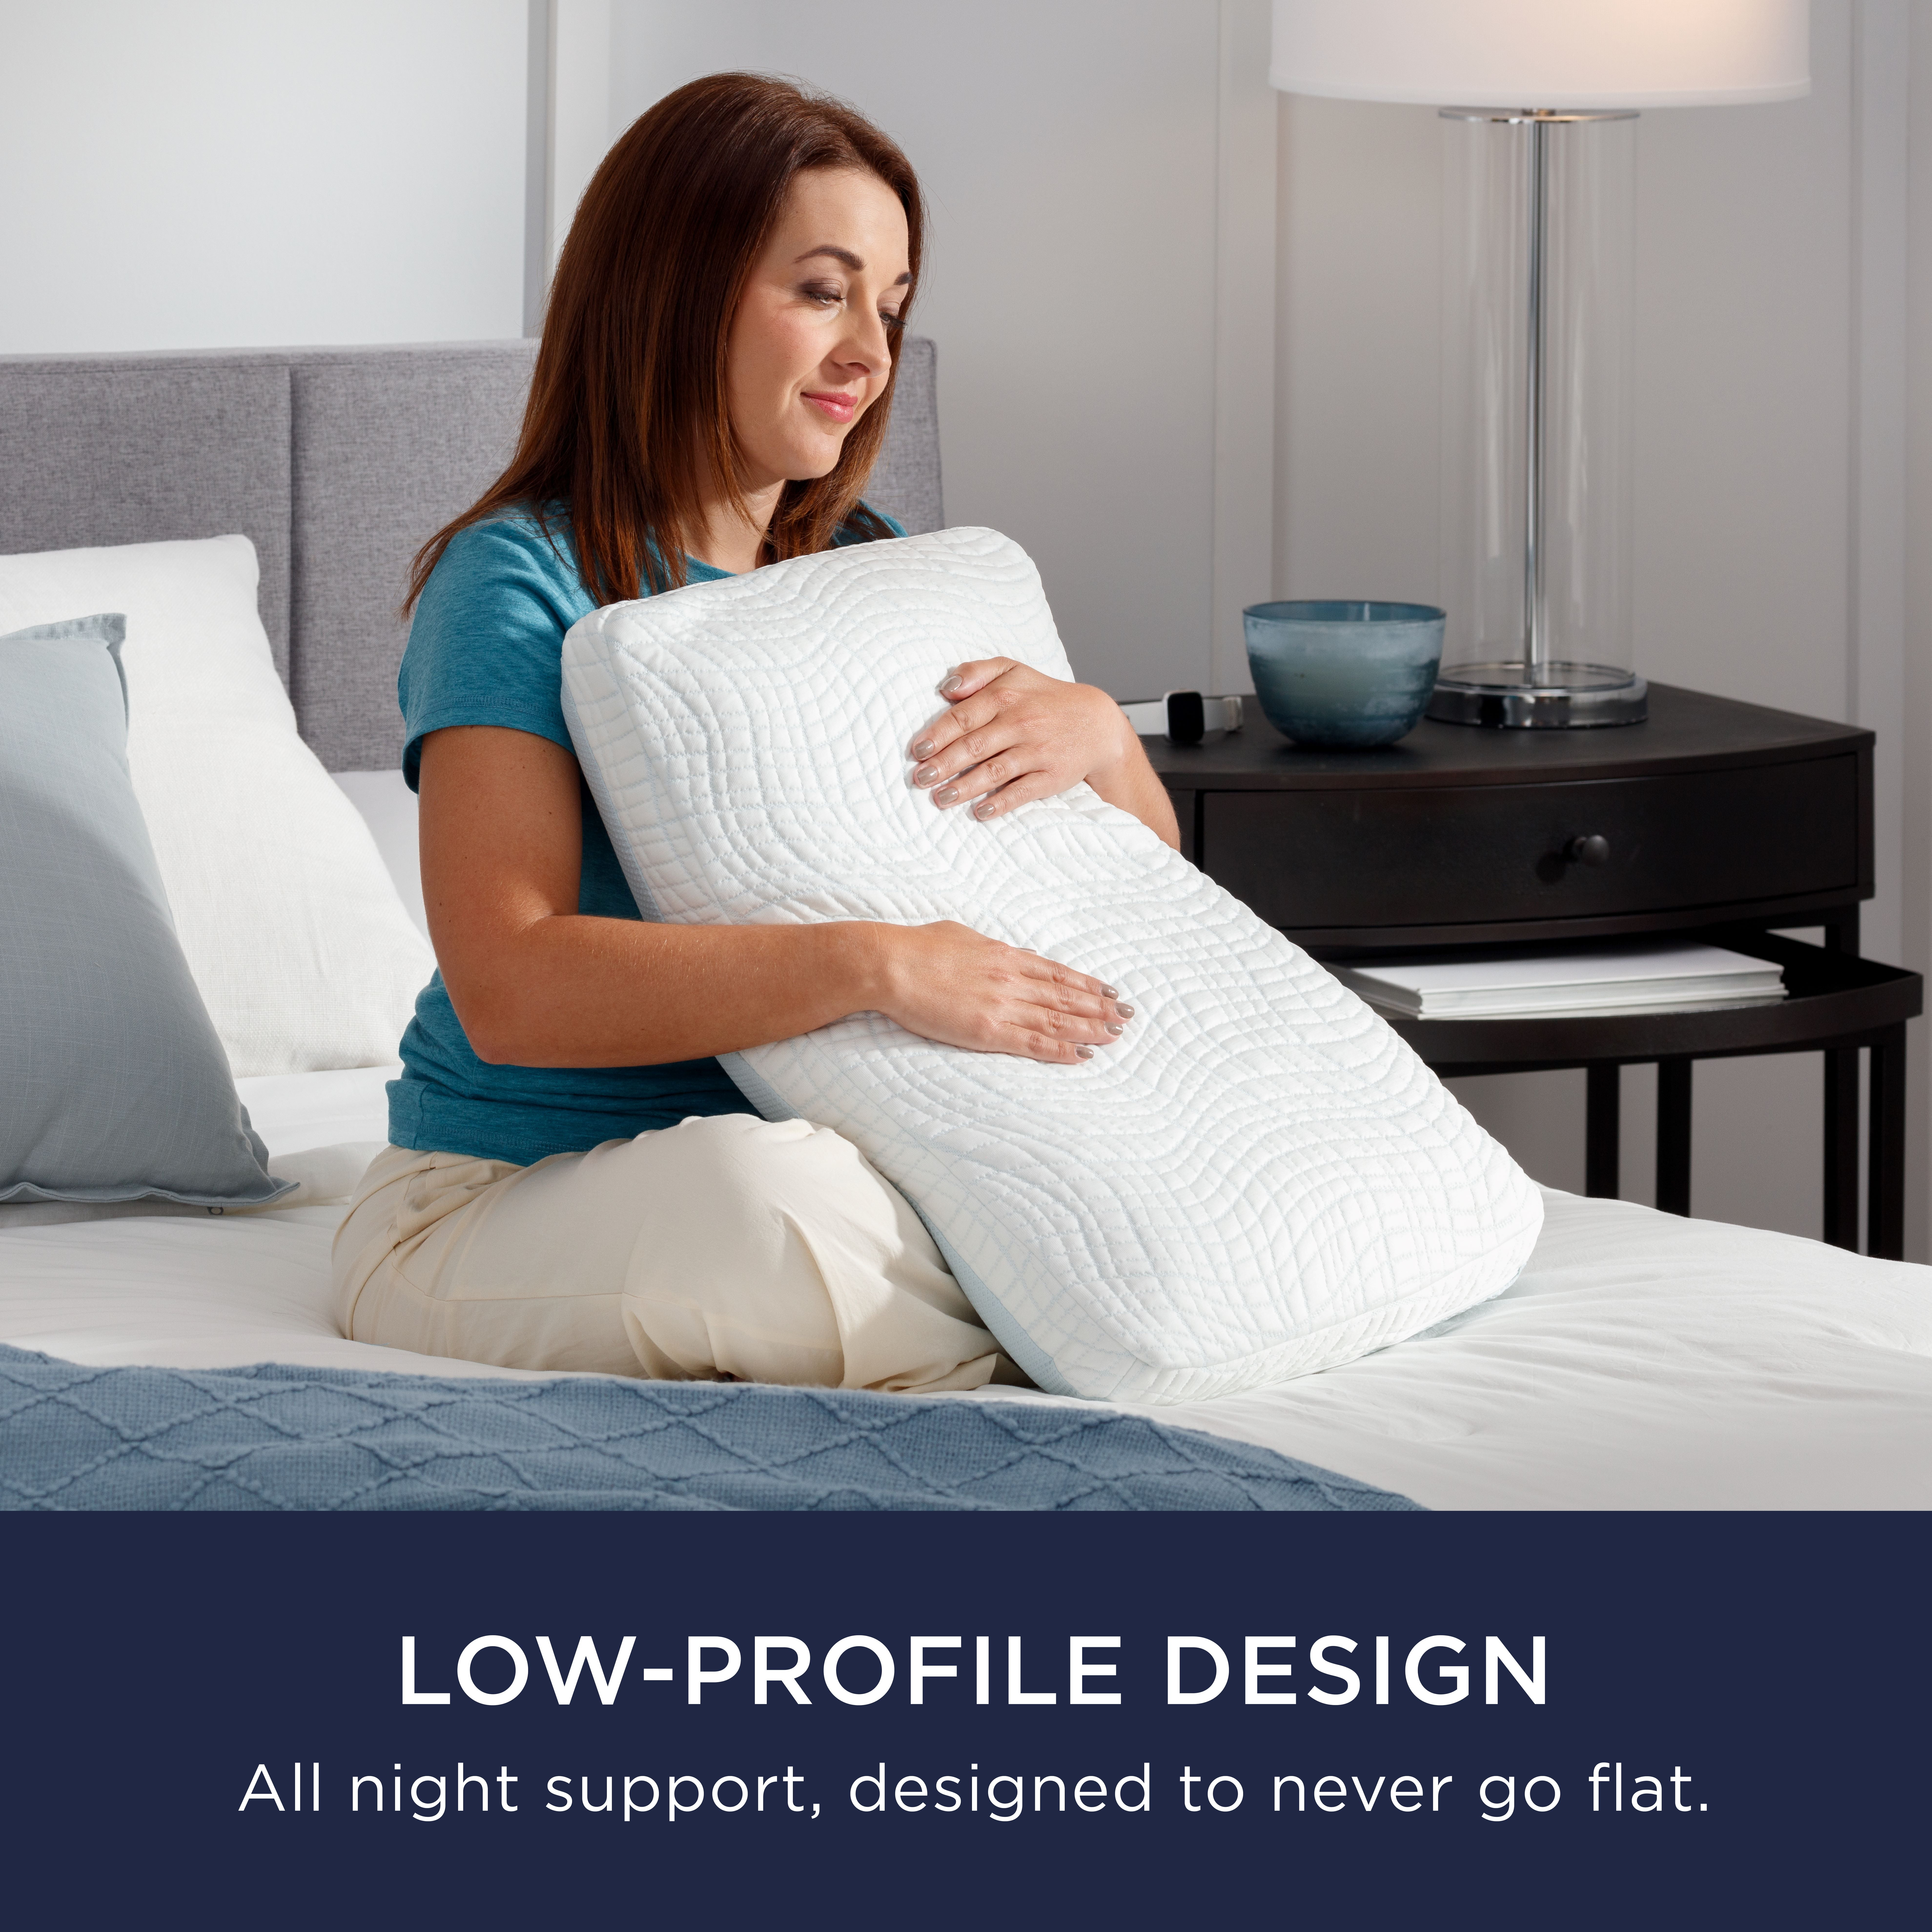 Large Square Pillows for Bed  Best Square Bed Pillows on Sale –  sdeepurpedic